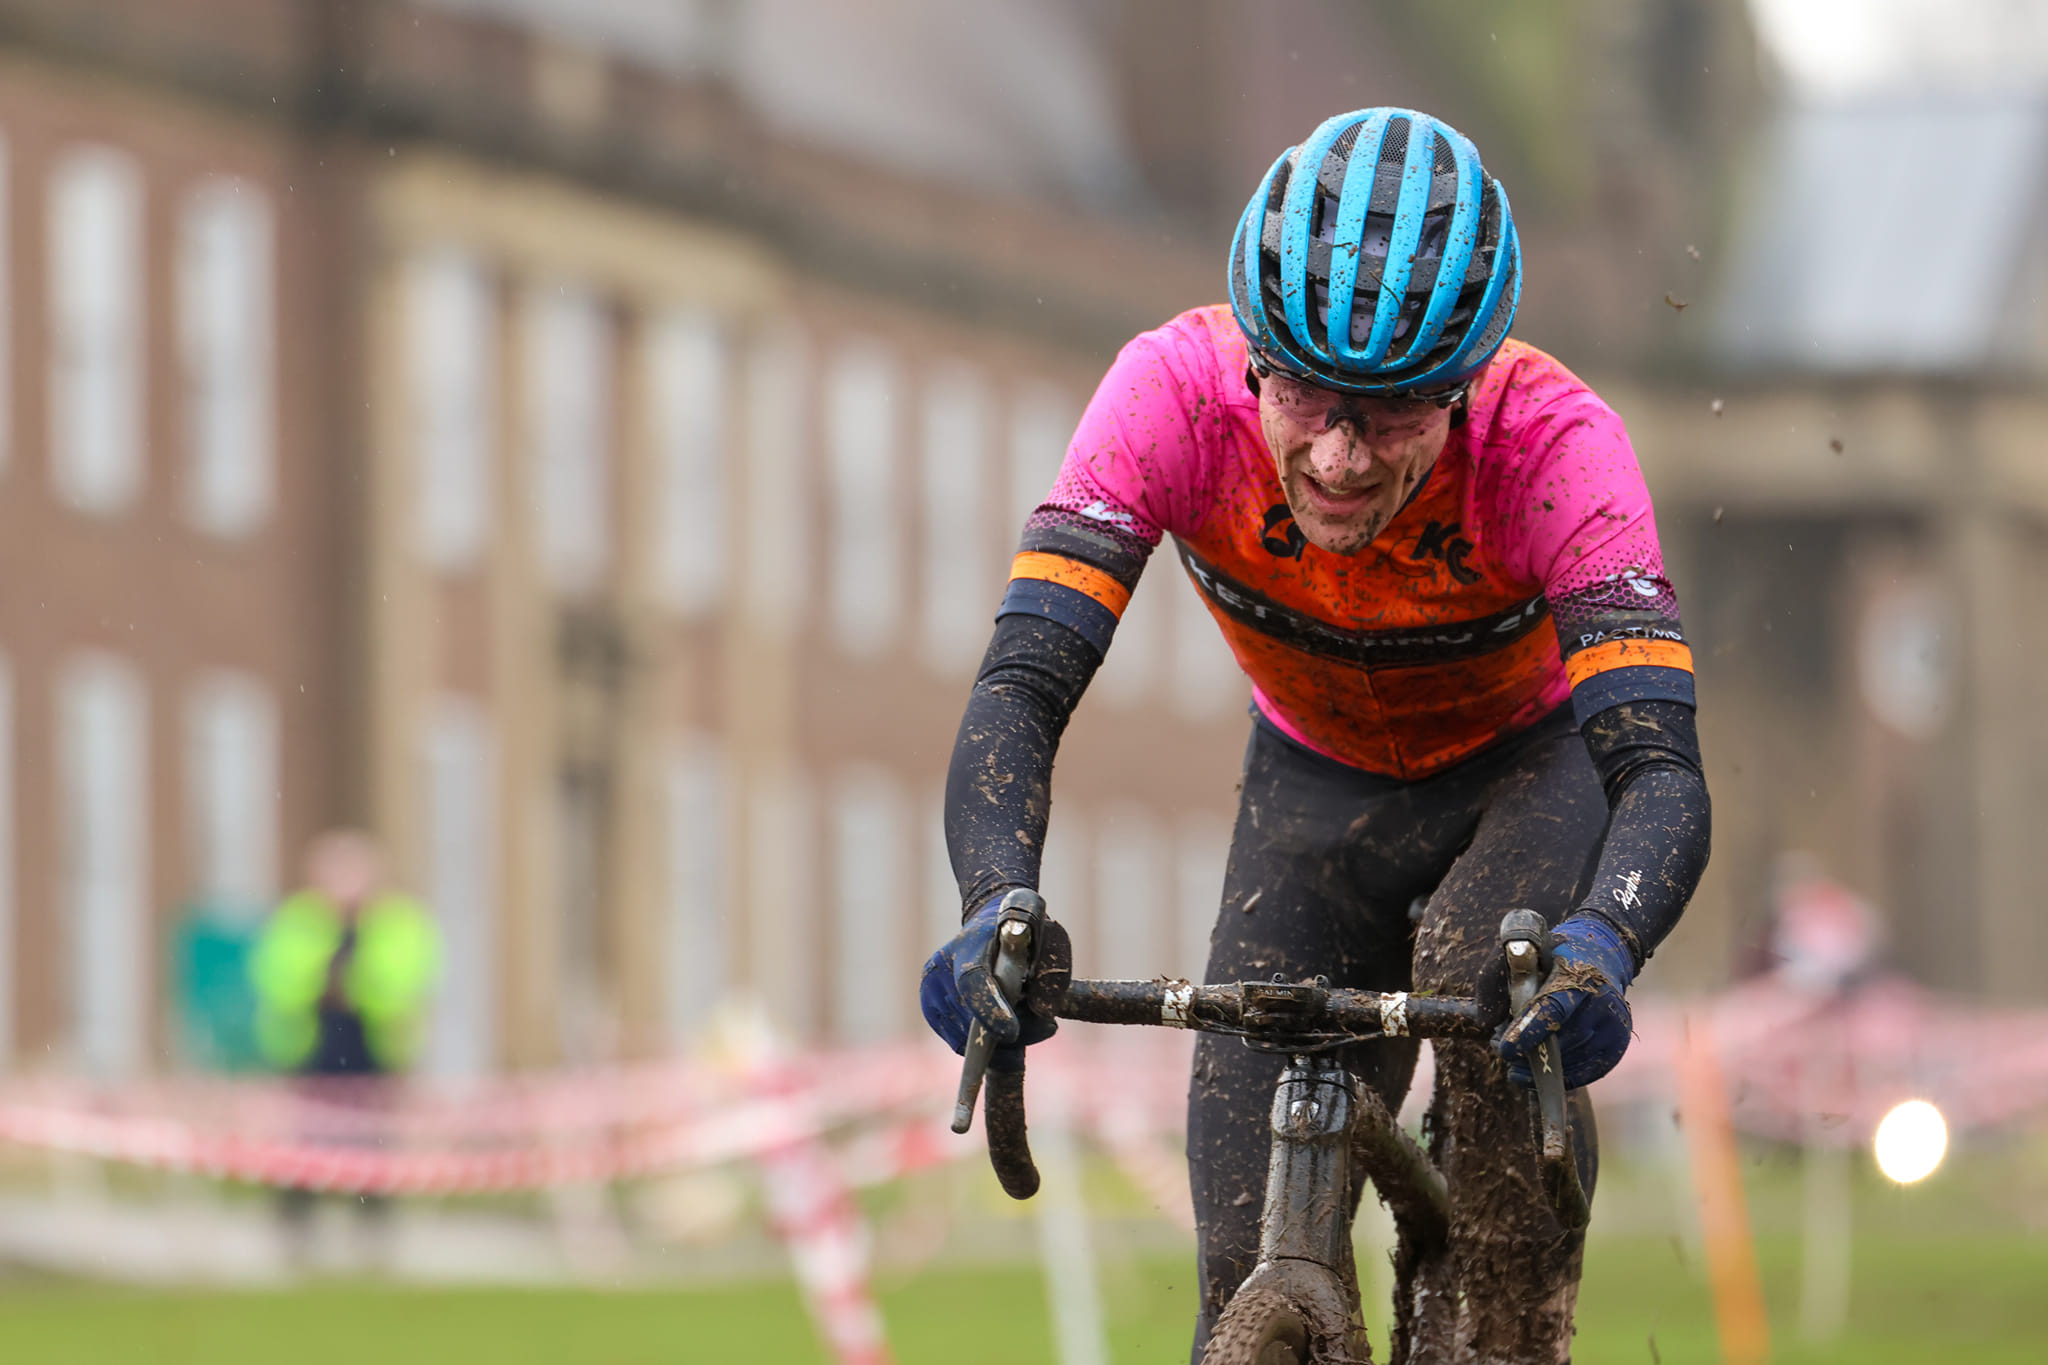 Cyclocross action